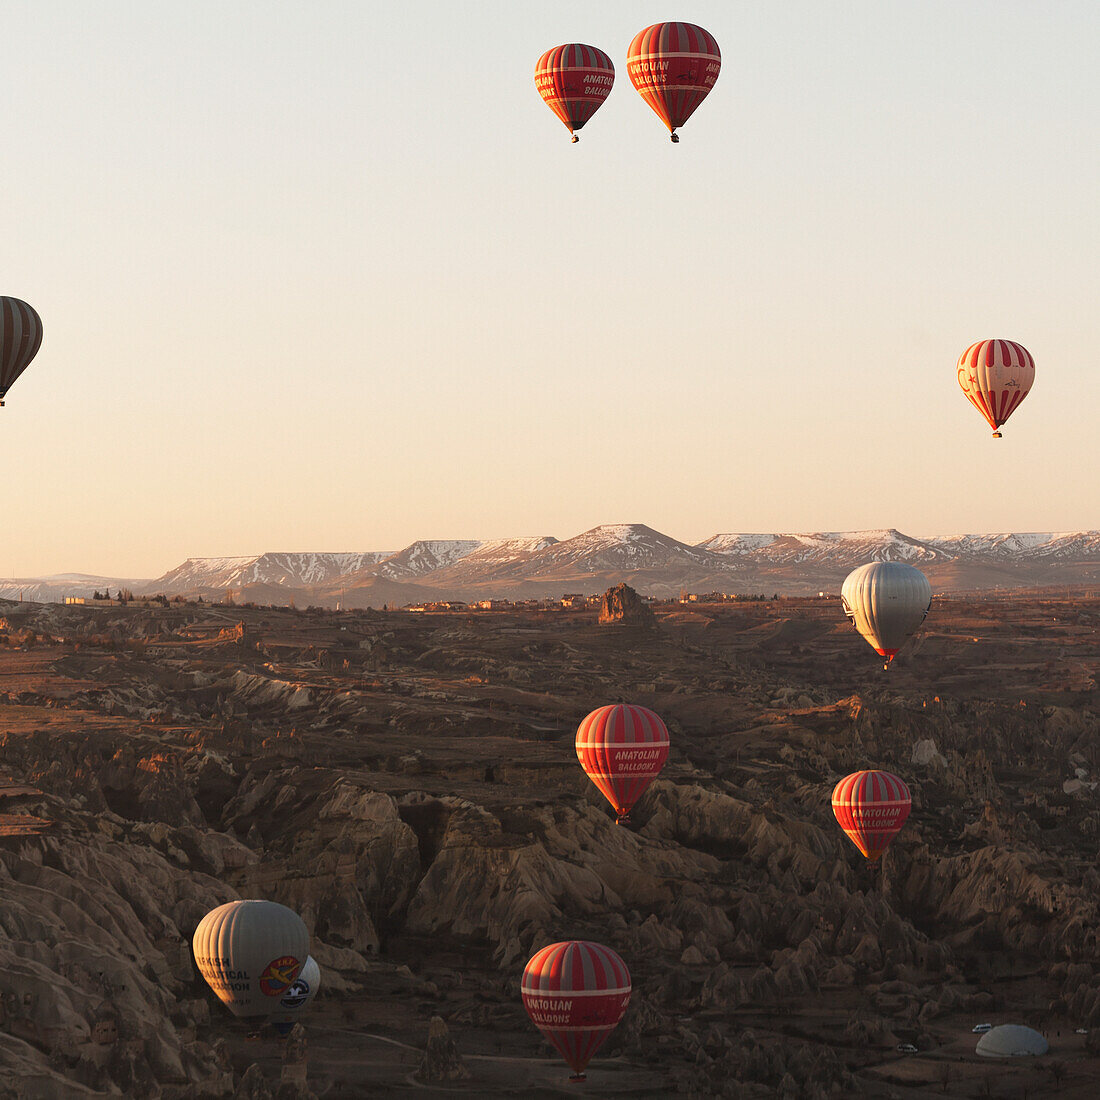 Numerous Hot Air Balloons In The Sky; Goreme Nevsehir Turkey